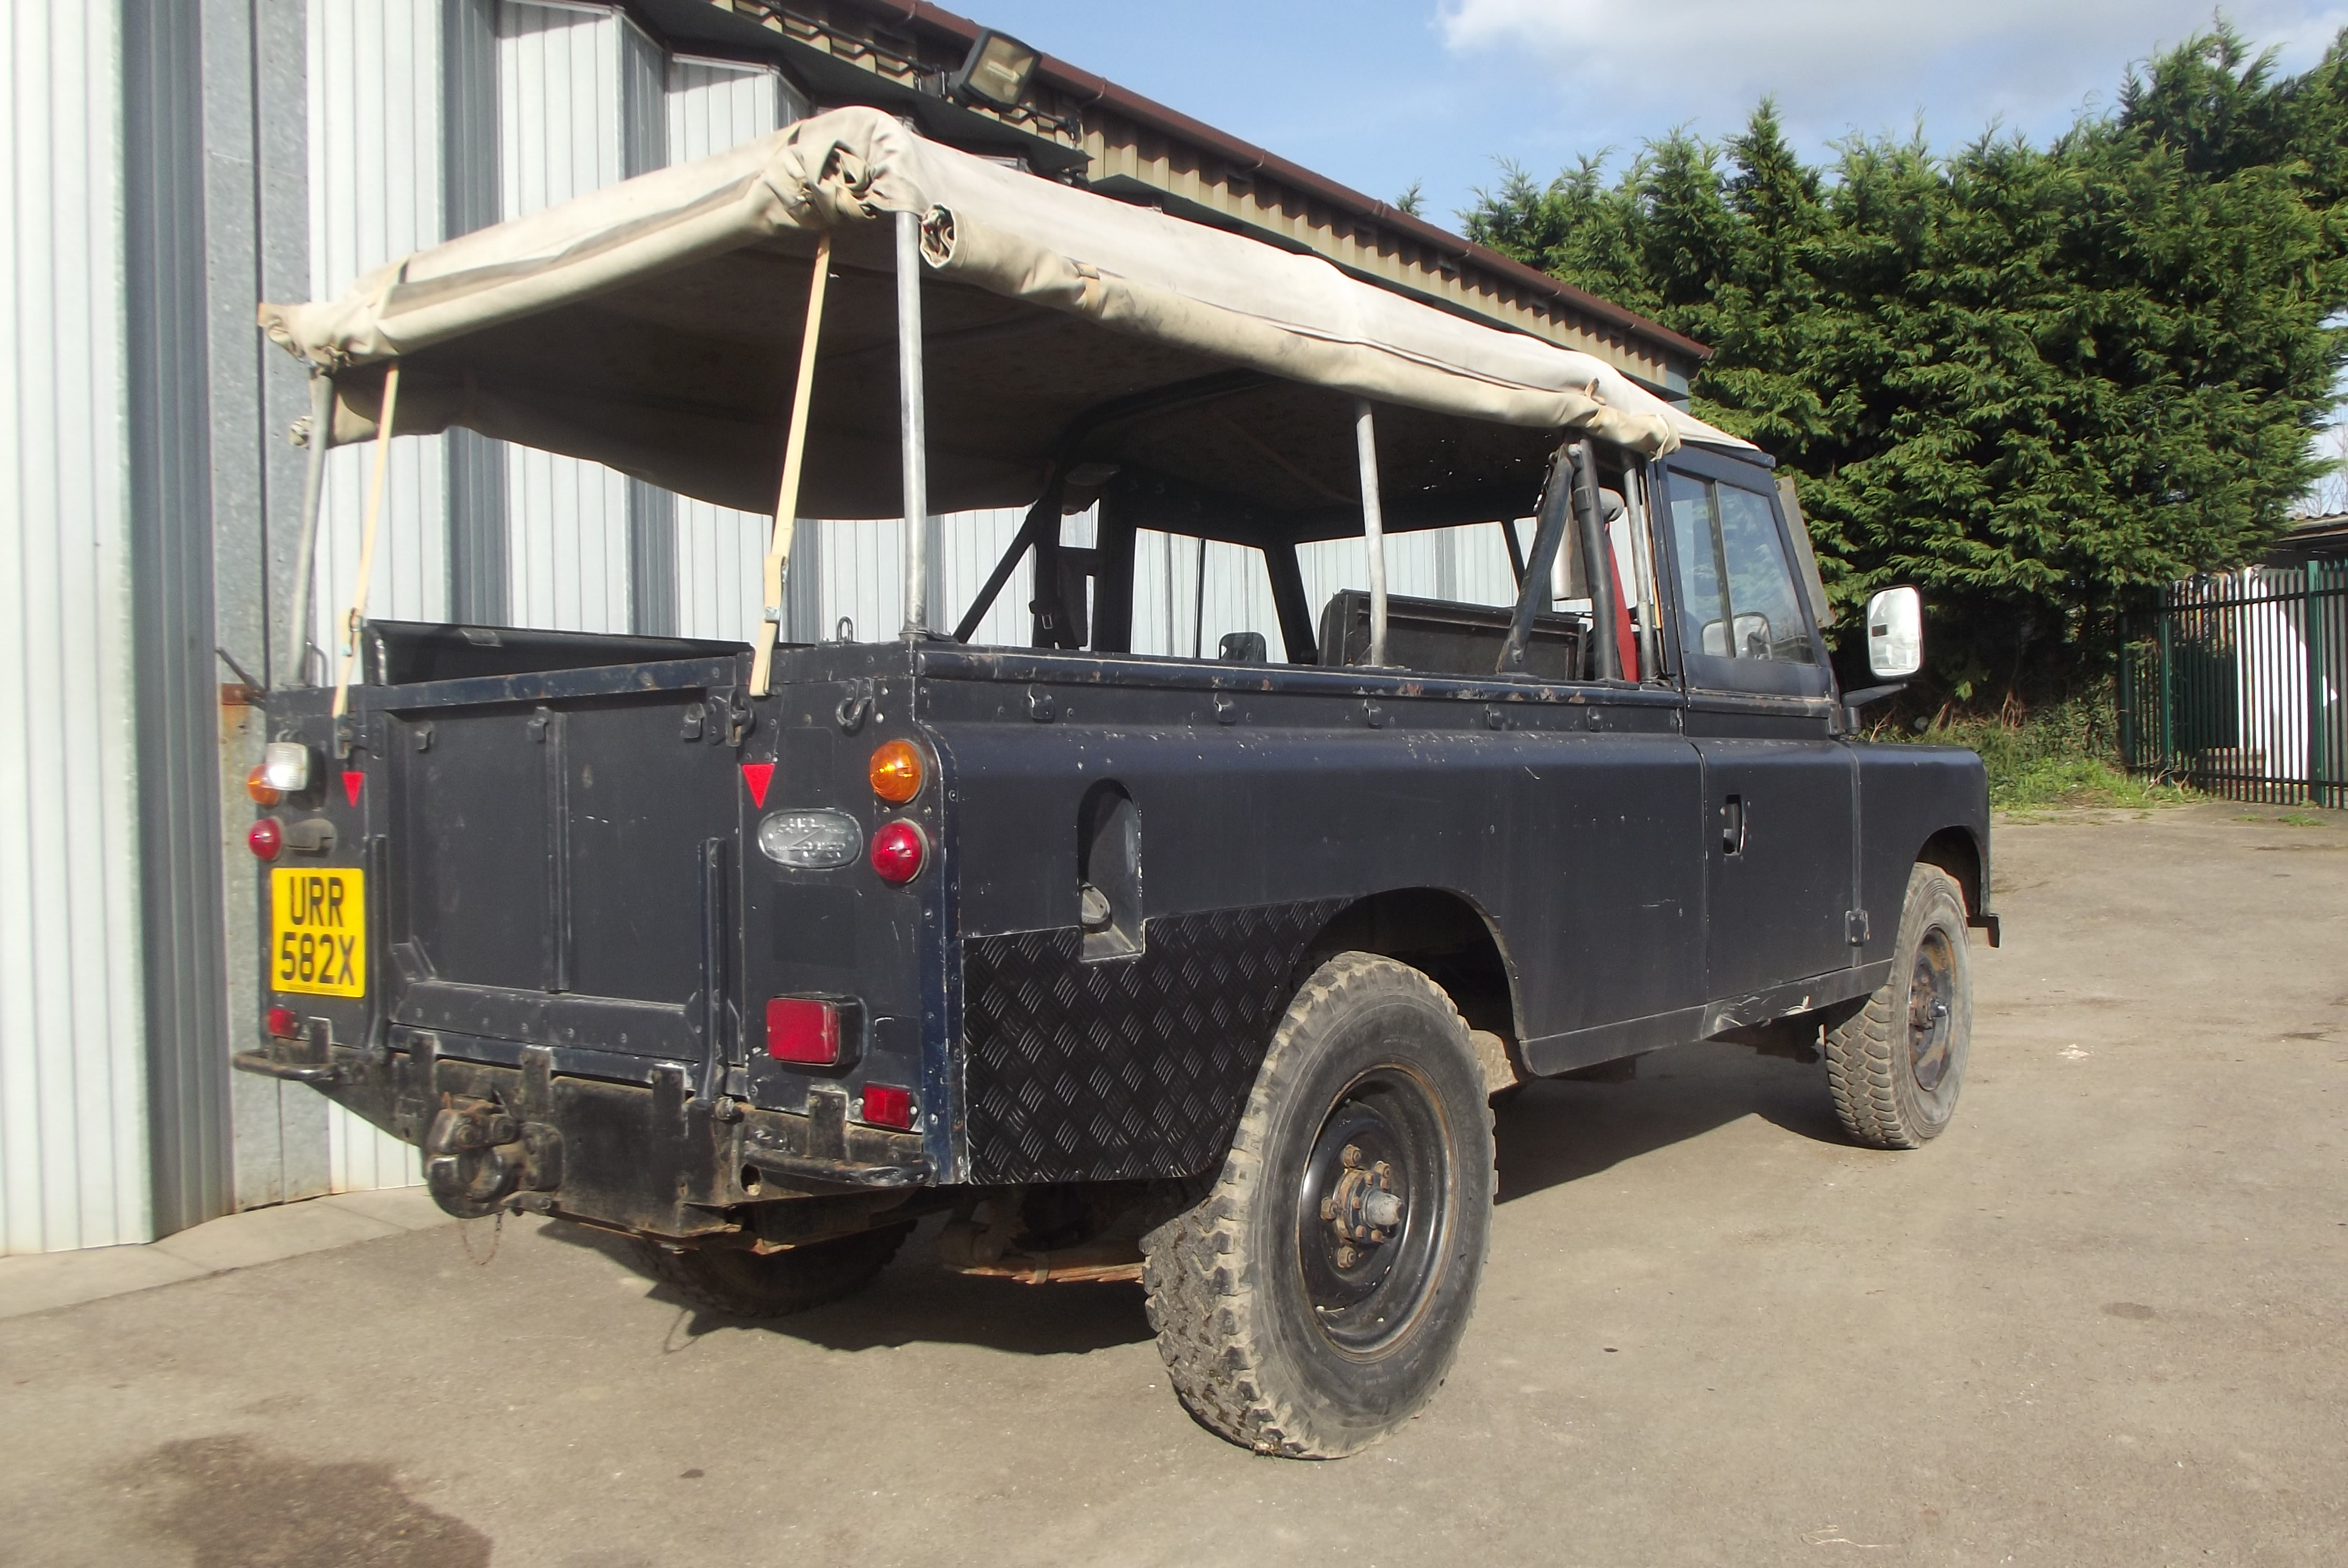 A 1982 Land Rover Series 3 LWB Petrol, registration URR 582X, chassis number SALLBCAH1AA160687, - Image 2 of 2